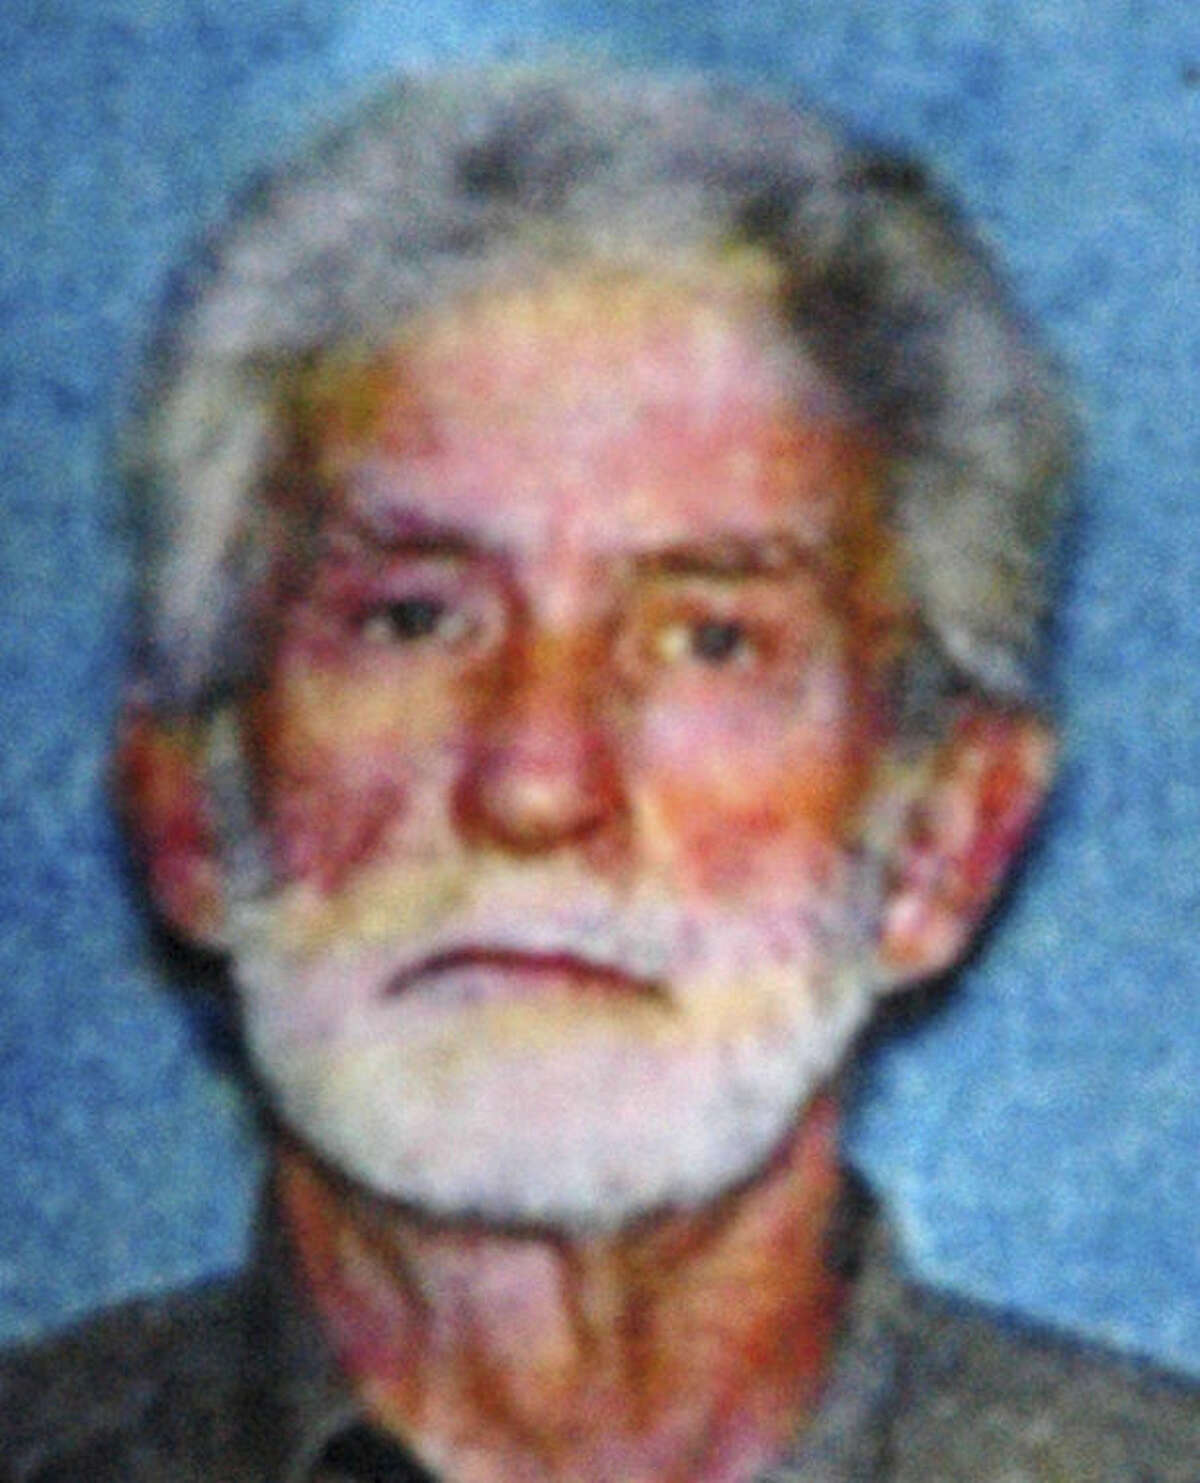 This photograph released by the Alabama Department of Public Safety shows Jimmy Lee Dykes, a 65-year-old retired truck driver officials identify as the suspect in a fatal shooting and hostage standoff in Midland City, Ala. (AP Photo/Alabama Department of Public Safety)